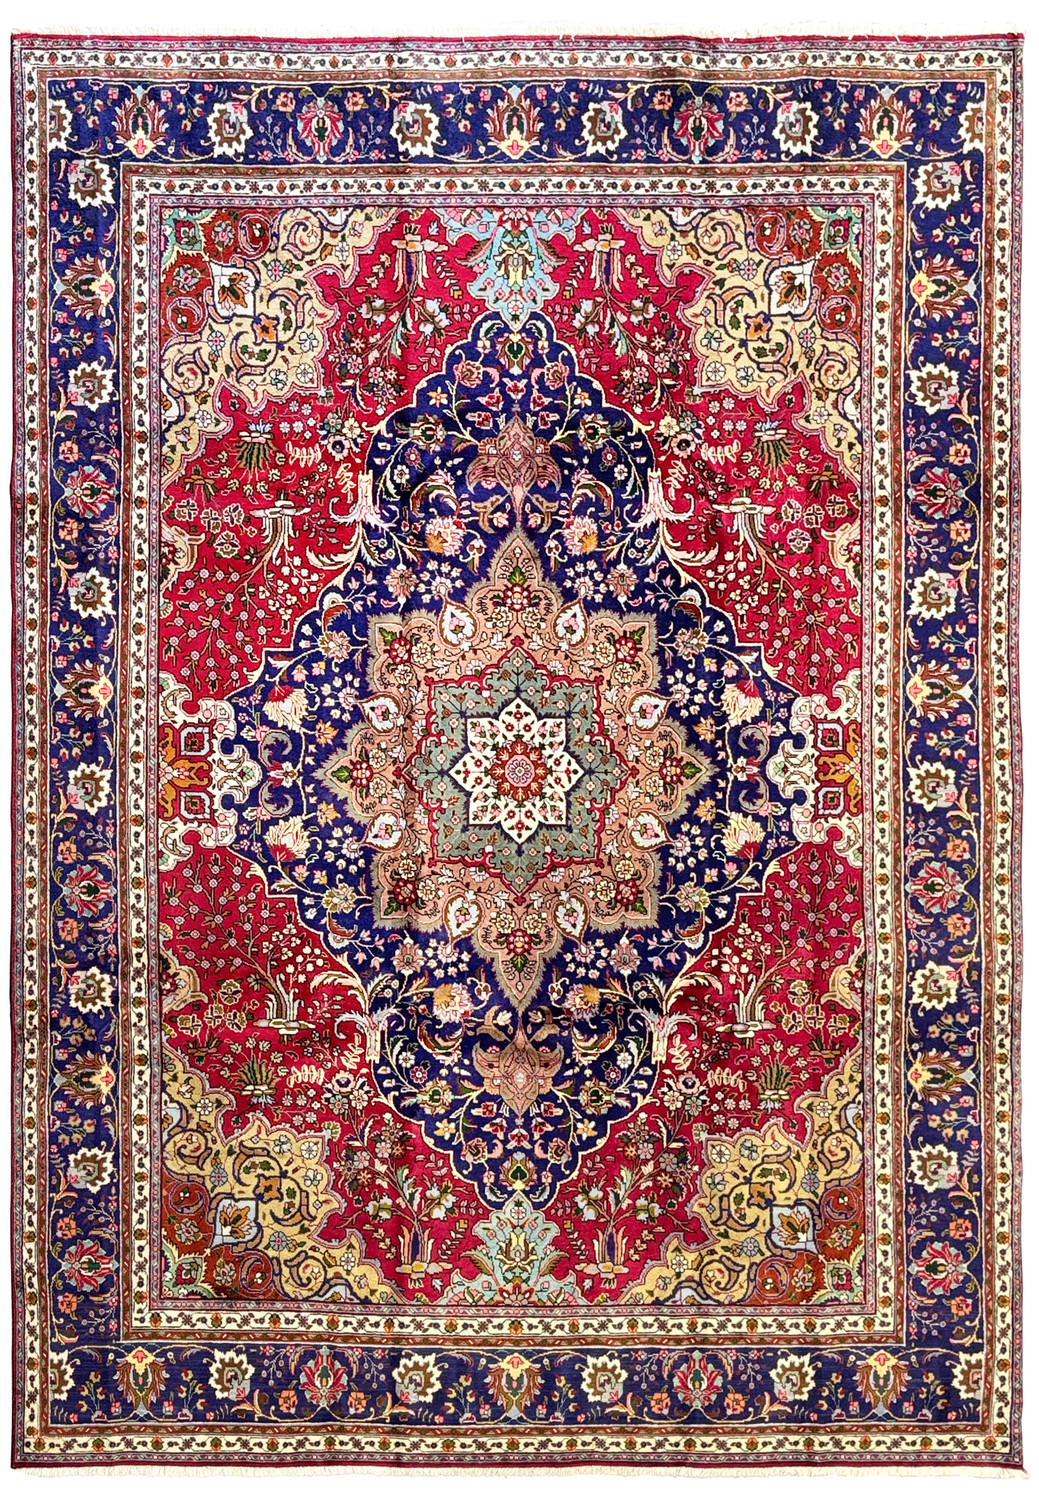 Full display of a Persian Geometric Tabriz Rug, emphasizing the expansive design with a central medallion, detailed borders, and a harmonious blend of red, blue, and cream hues